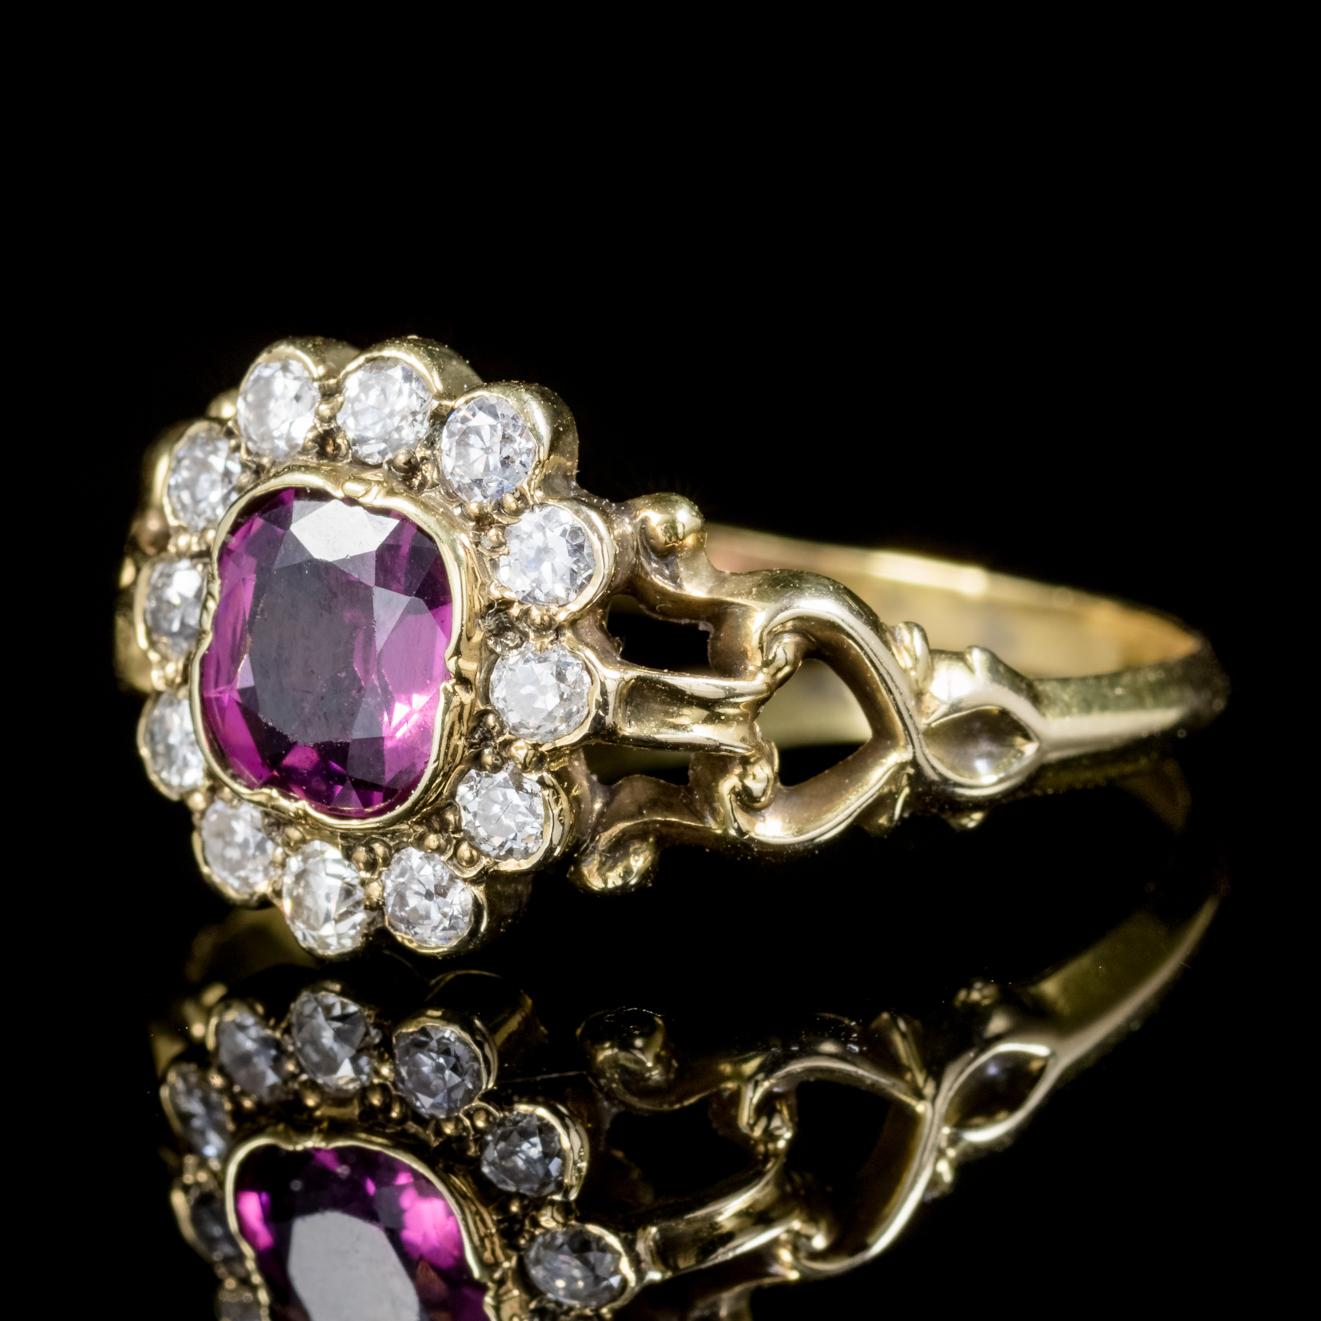 A fabulous antique French Amethyst and Diamond cluster ring made during the Victorian era, Circa 1860. 

The piece boasts a beautiful violet Amethyst which is approx. 0.65ct, surrounded by a halo of Diamonds, approx. 0.36ct in total. 

Amethyst has